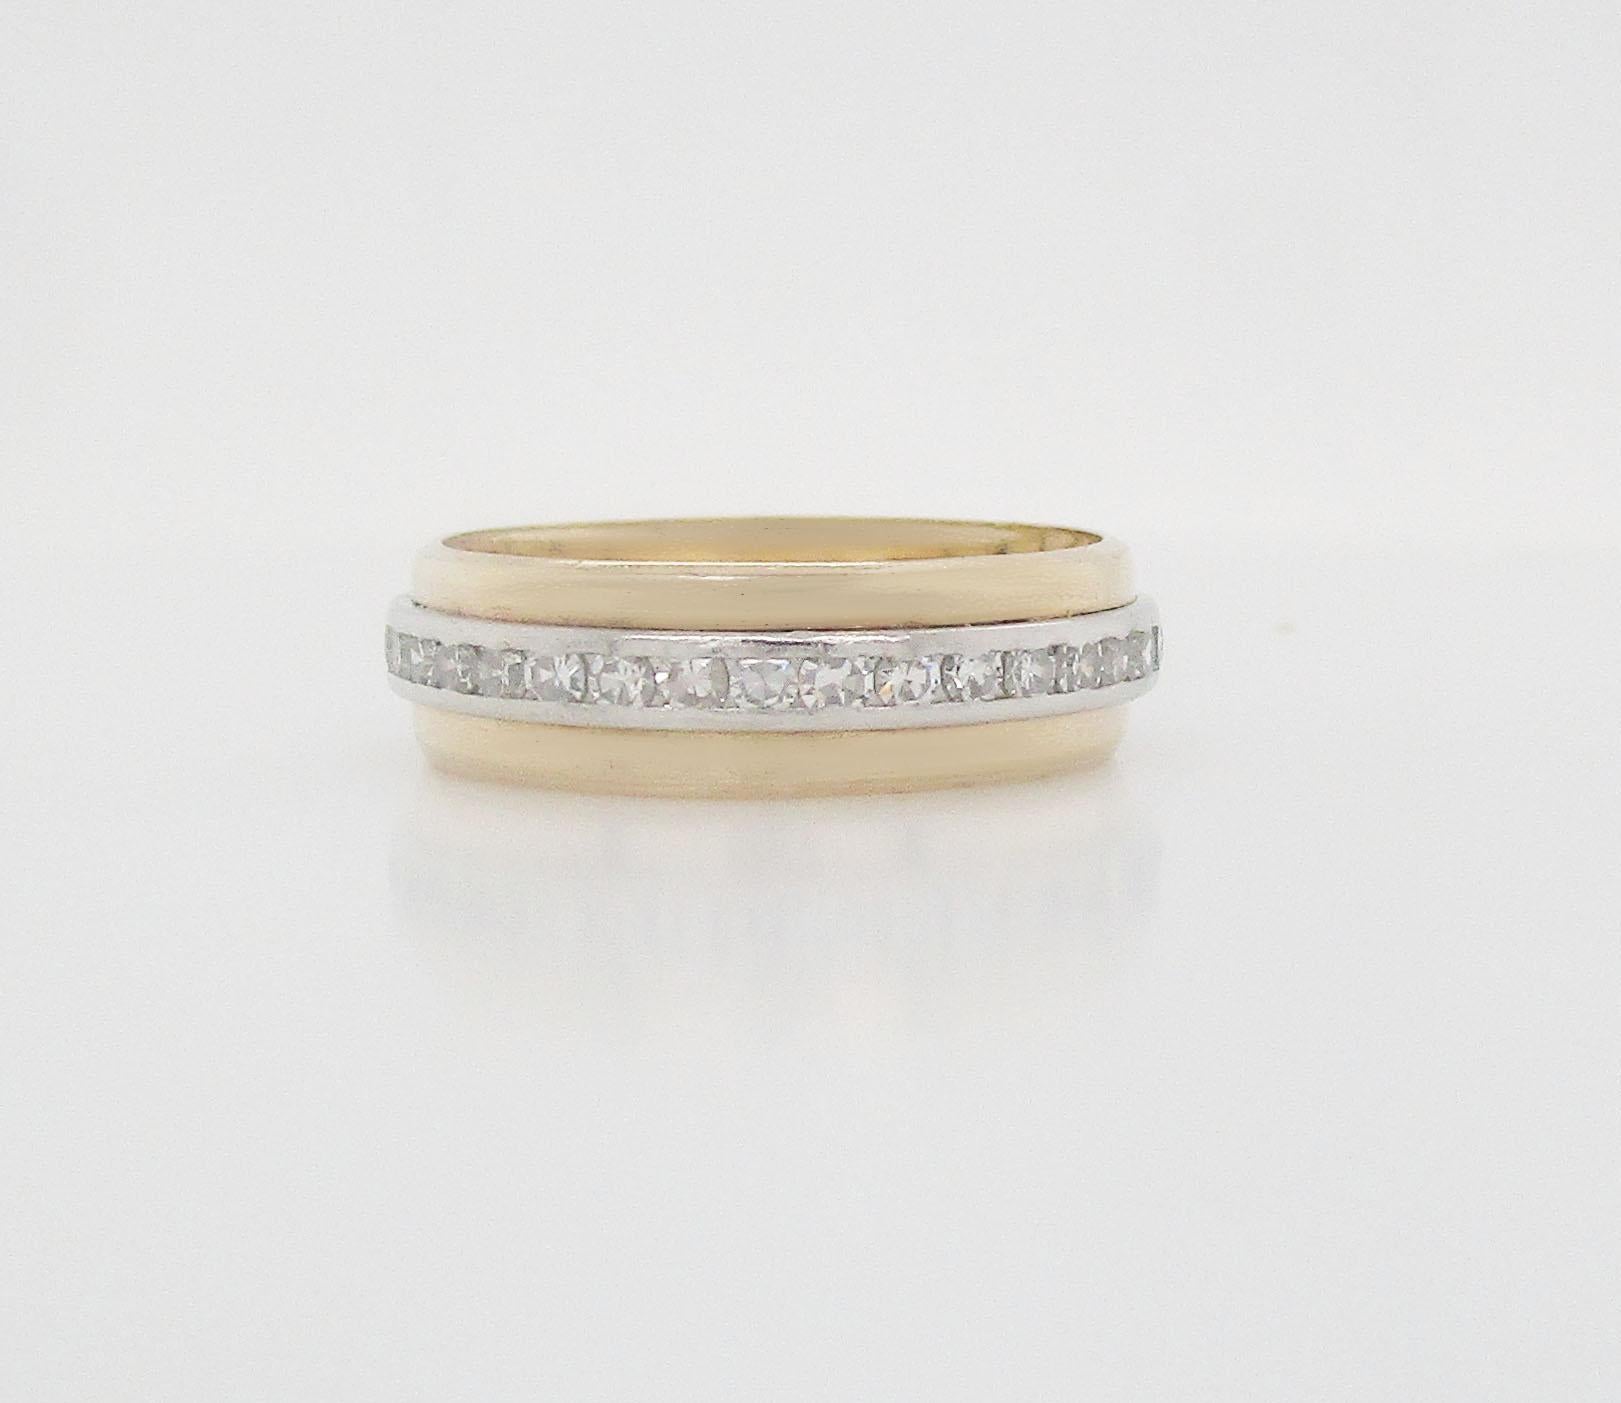 This is a beautiful platinum and 14k yellow gold eternity band. This ring is from about 1940-50. It’s a great band with two bands of yellow around a platinum band to create a layered look. This is the perfect stacking band because, with this one